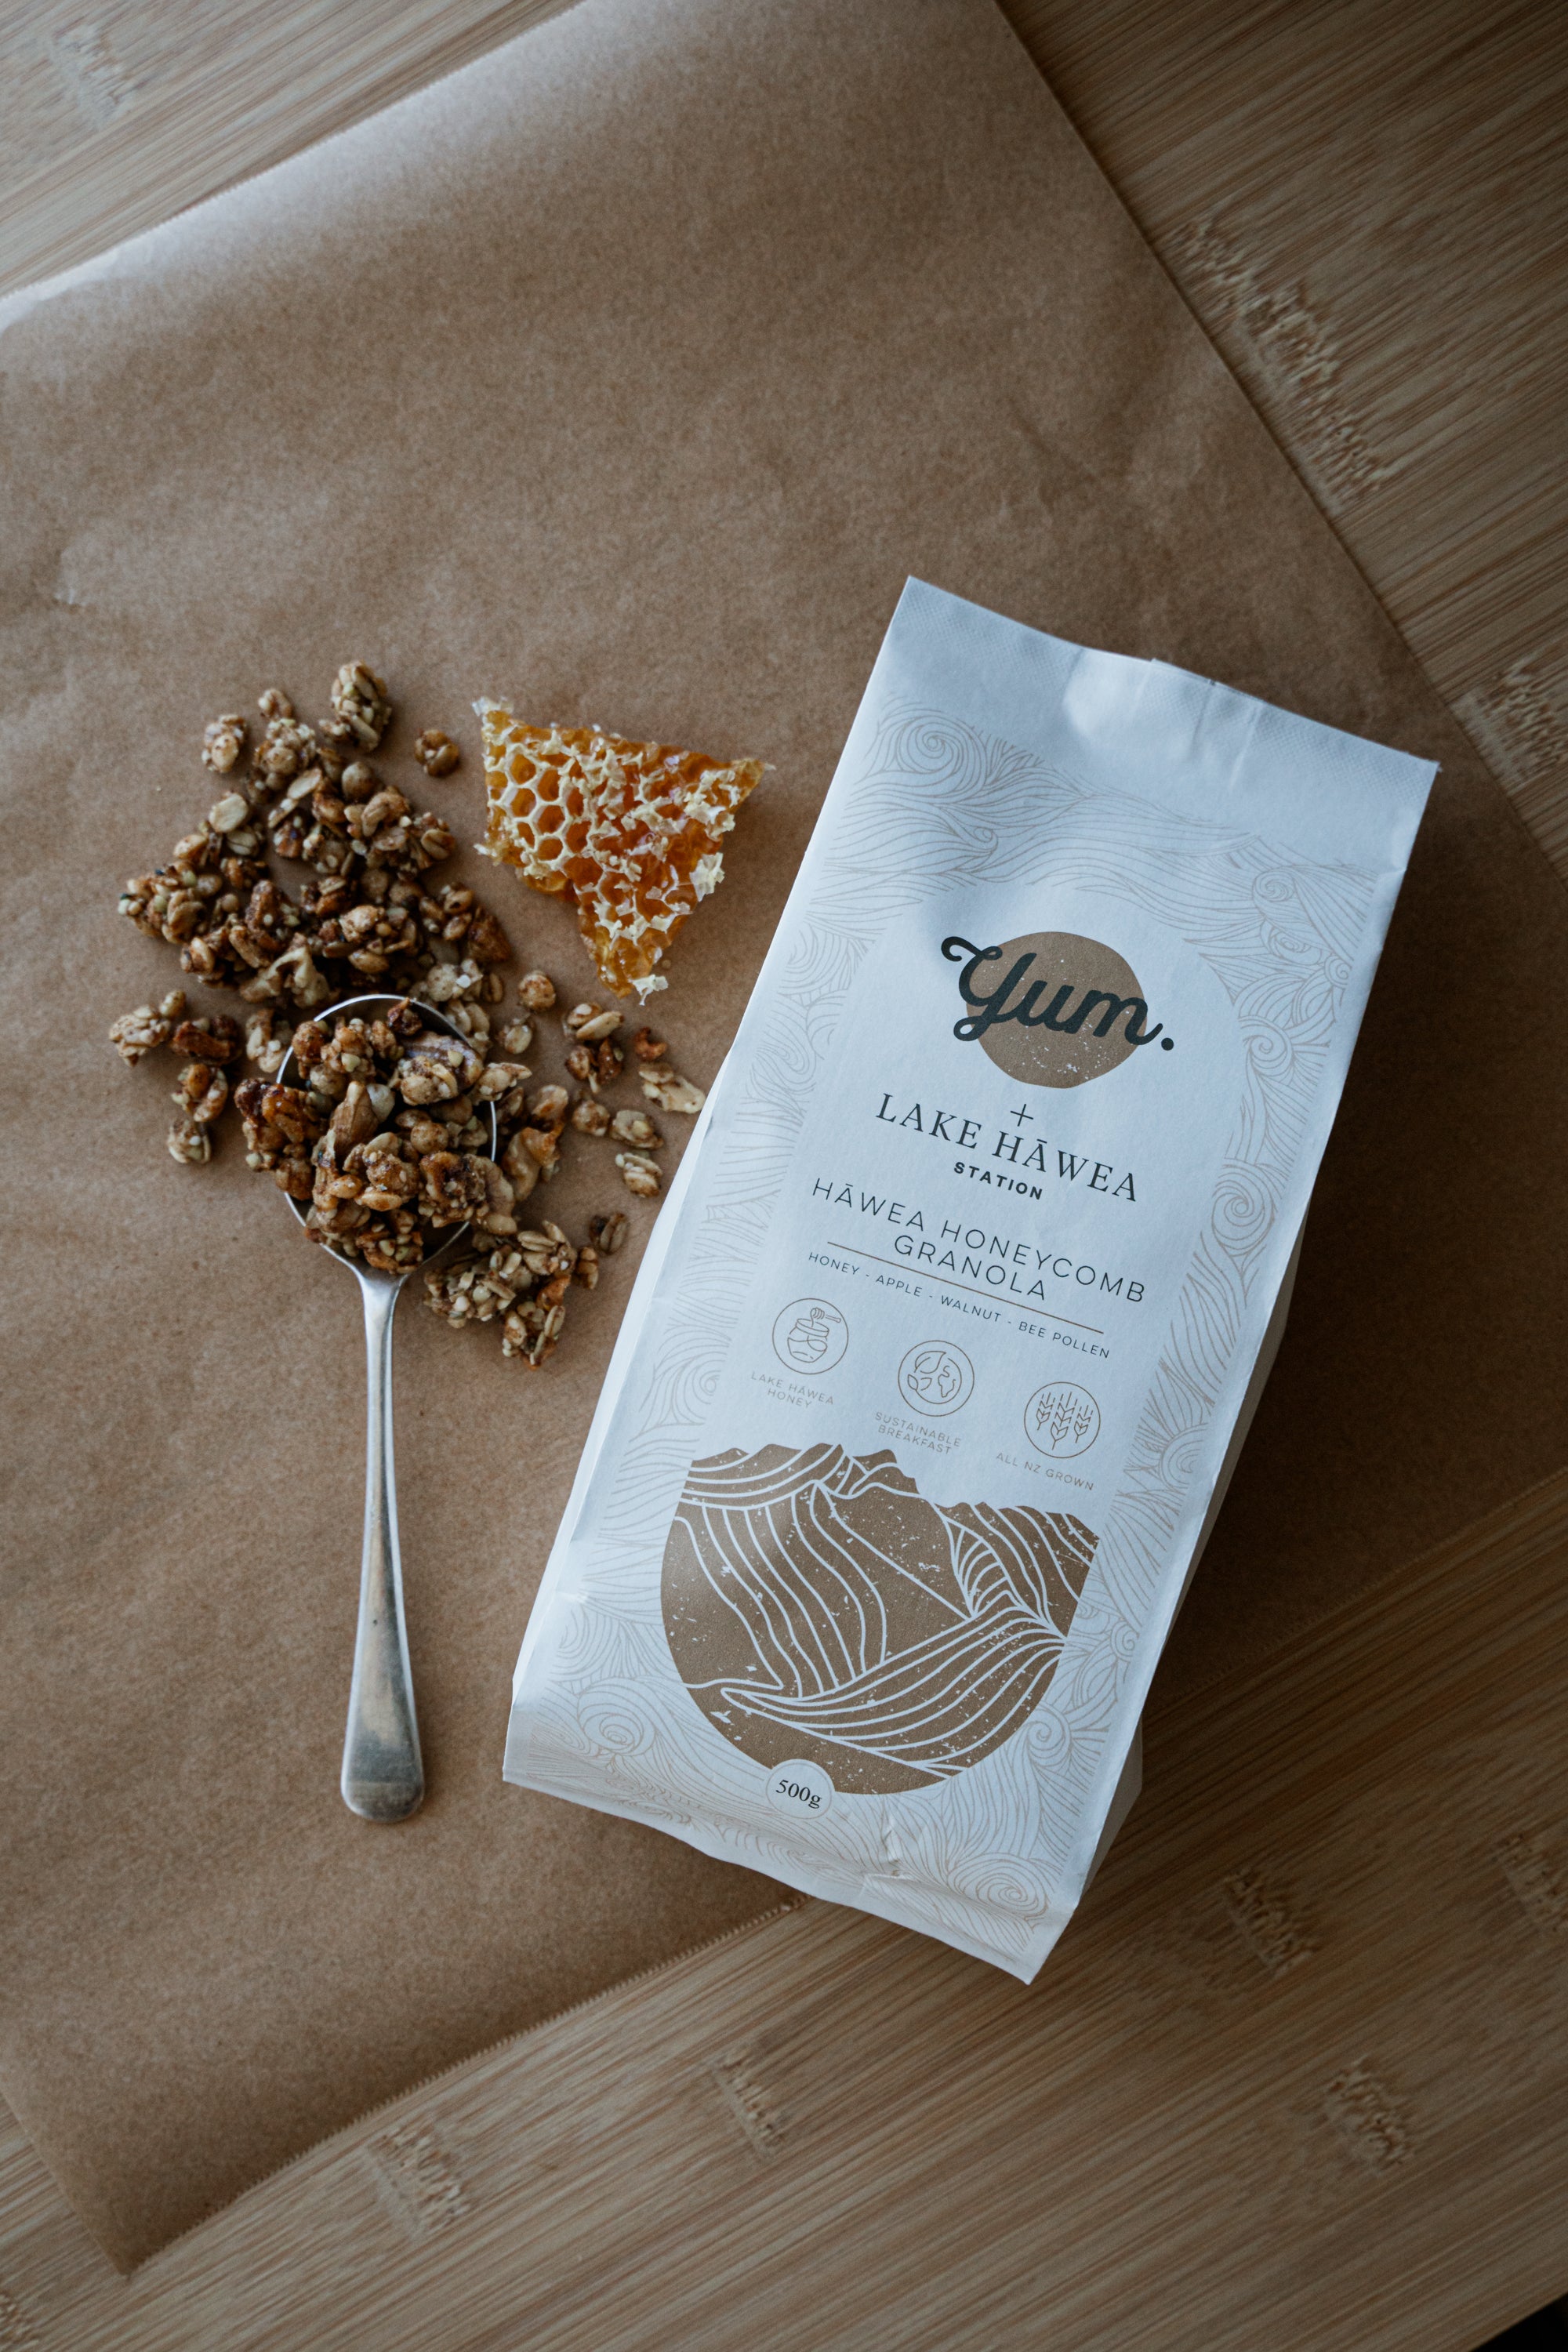 The story behind a VERY special granola-- Hawea Honeycomb Granola